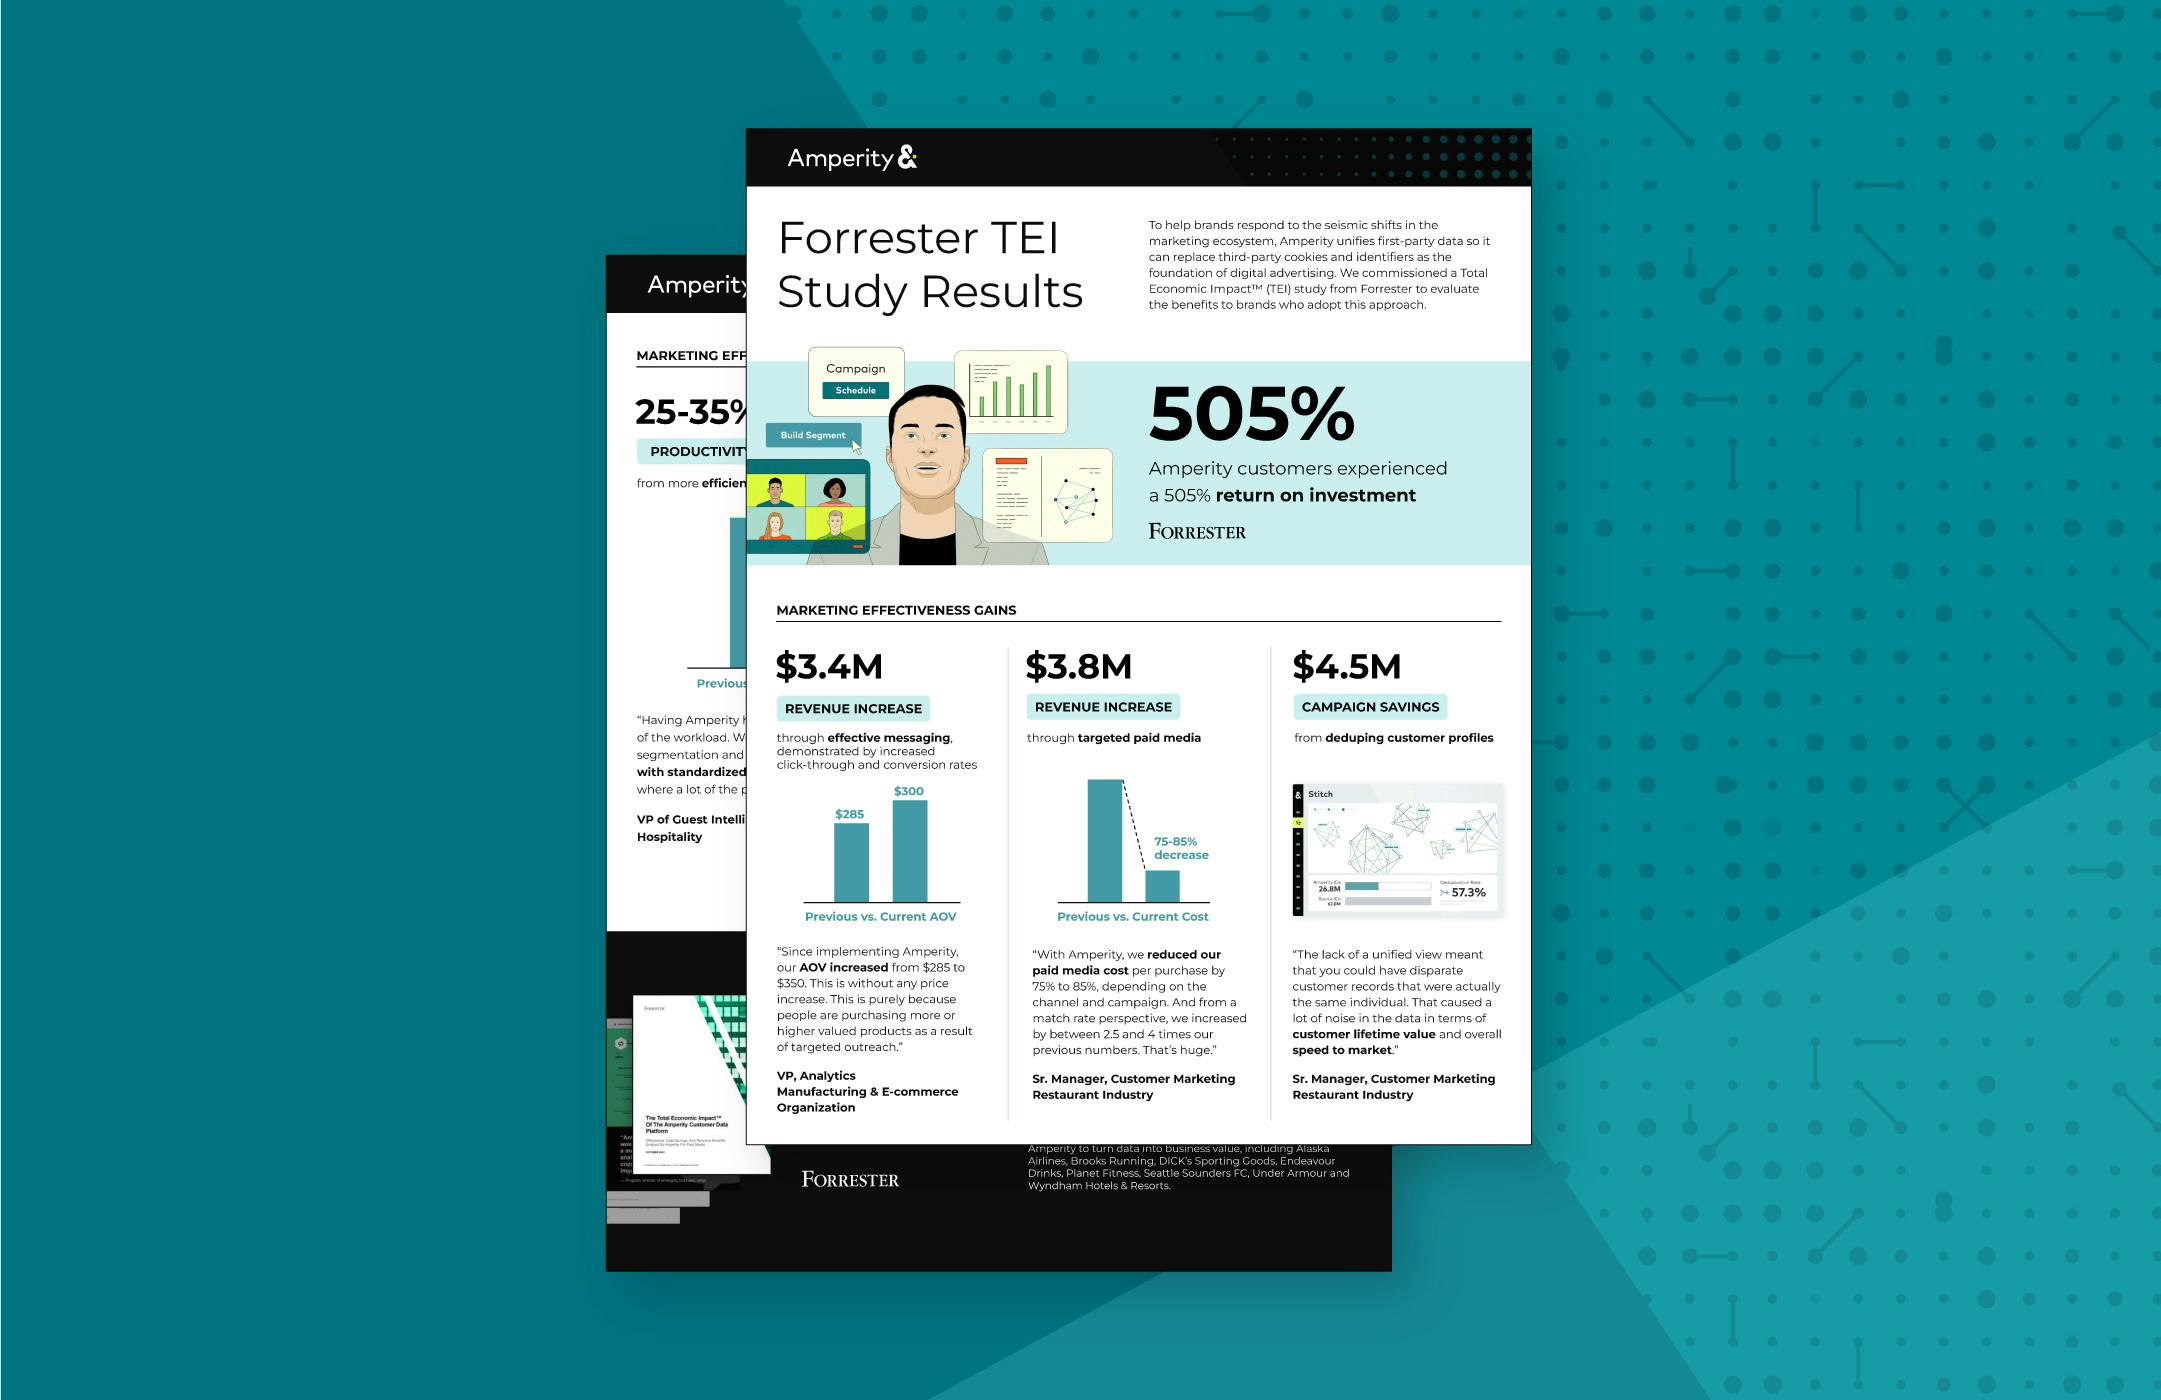 Snapshot of the Forrester TEI Study Results guide